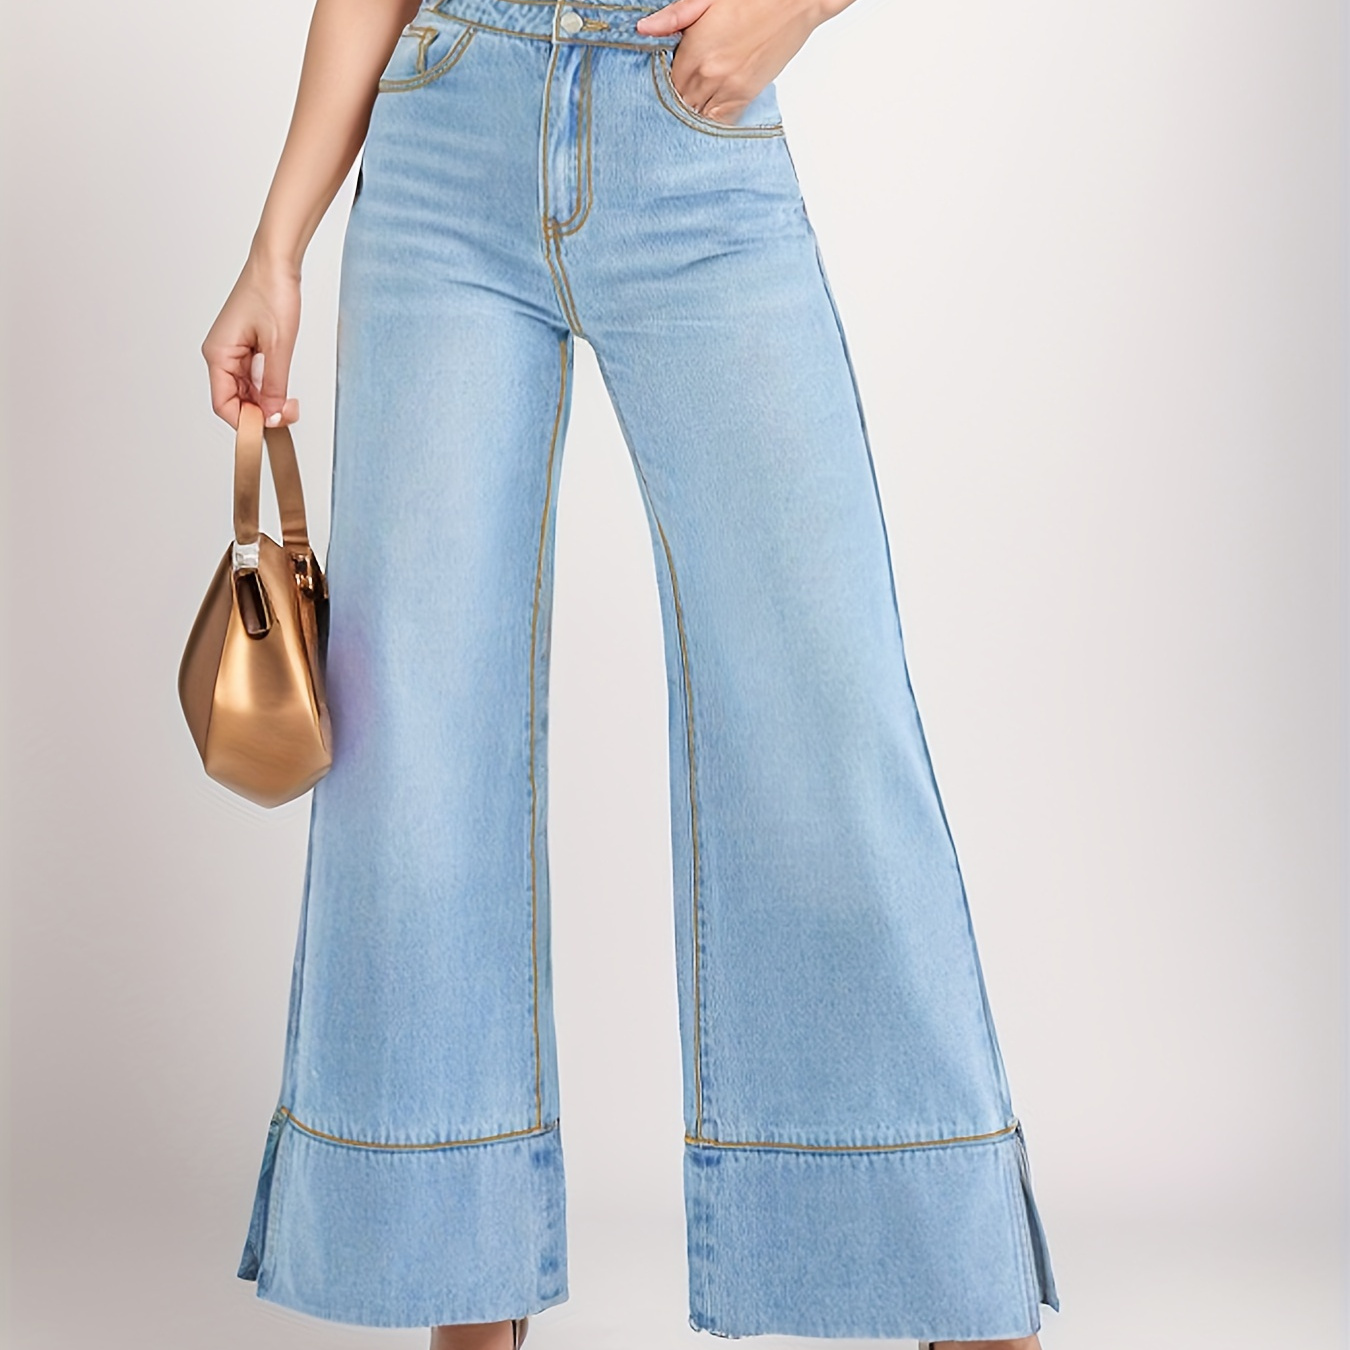 

High Waist Casual Baggy Jeans, Double Button High Stretch Wide Legs Jeans, Women's Denim Jeans & Clothing